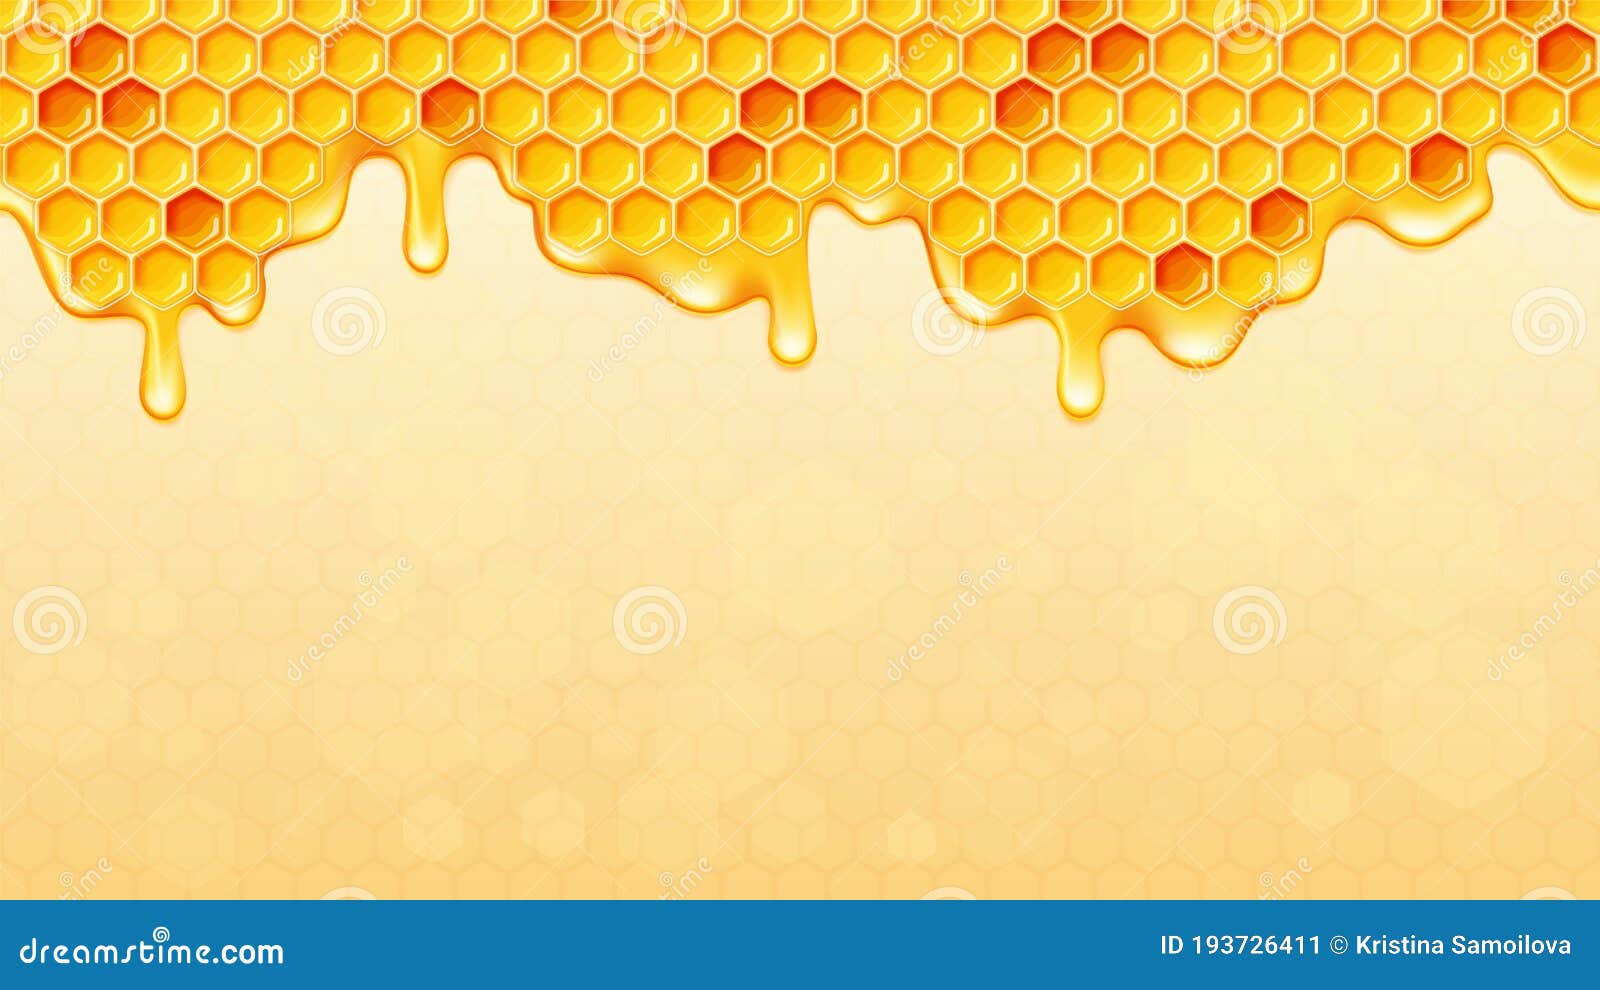 Dripping Honey Background with Honeycomb. Vector Illustration. Stock